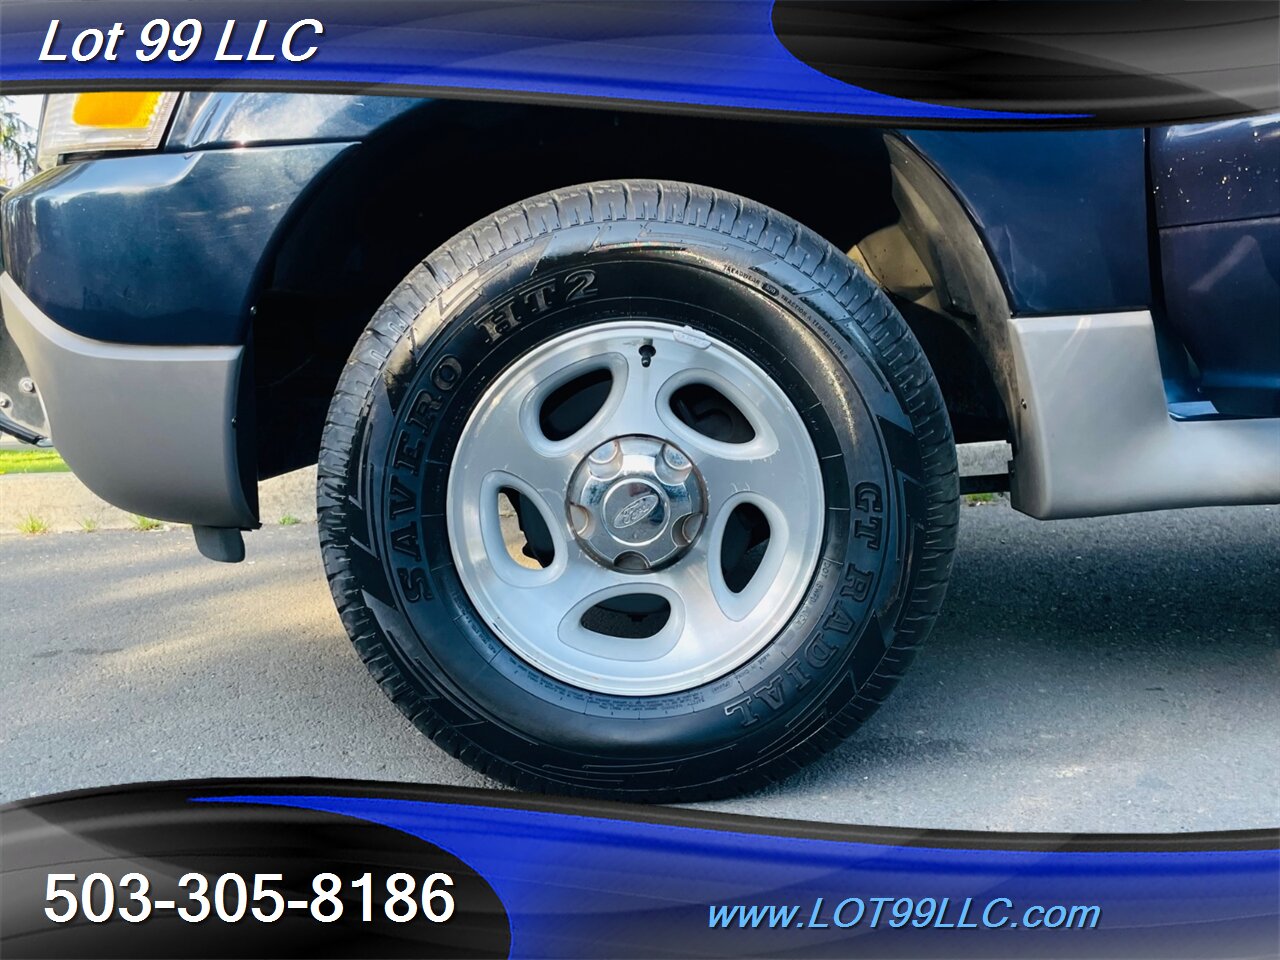 2003 Ford Explorer Sport Trac XLS 4x4  1-OWNER 117k  NEW TIRES  Canopy   - Photo 50 - Milwaukie, OR 97267